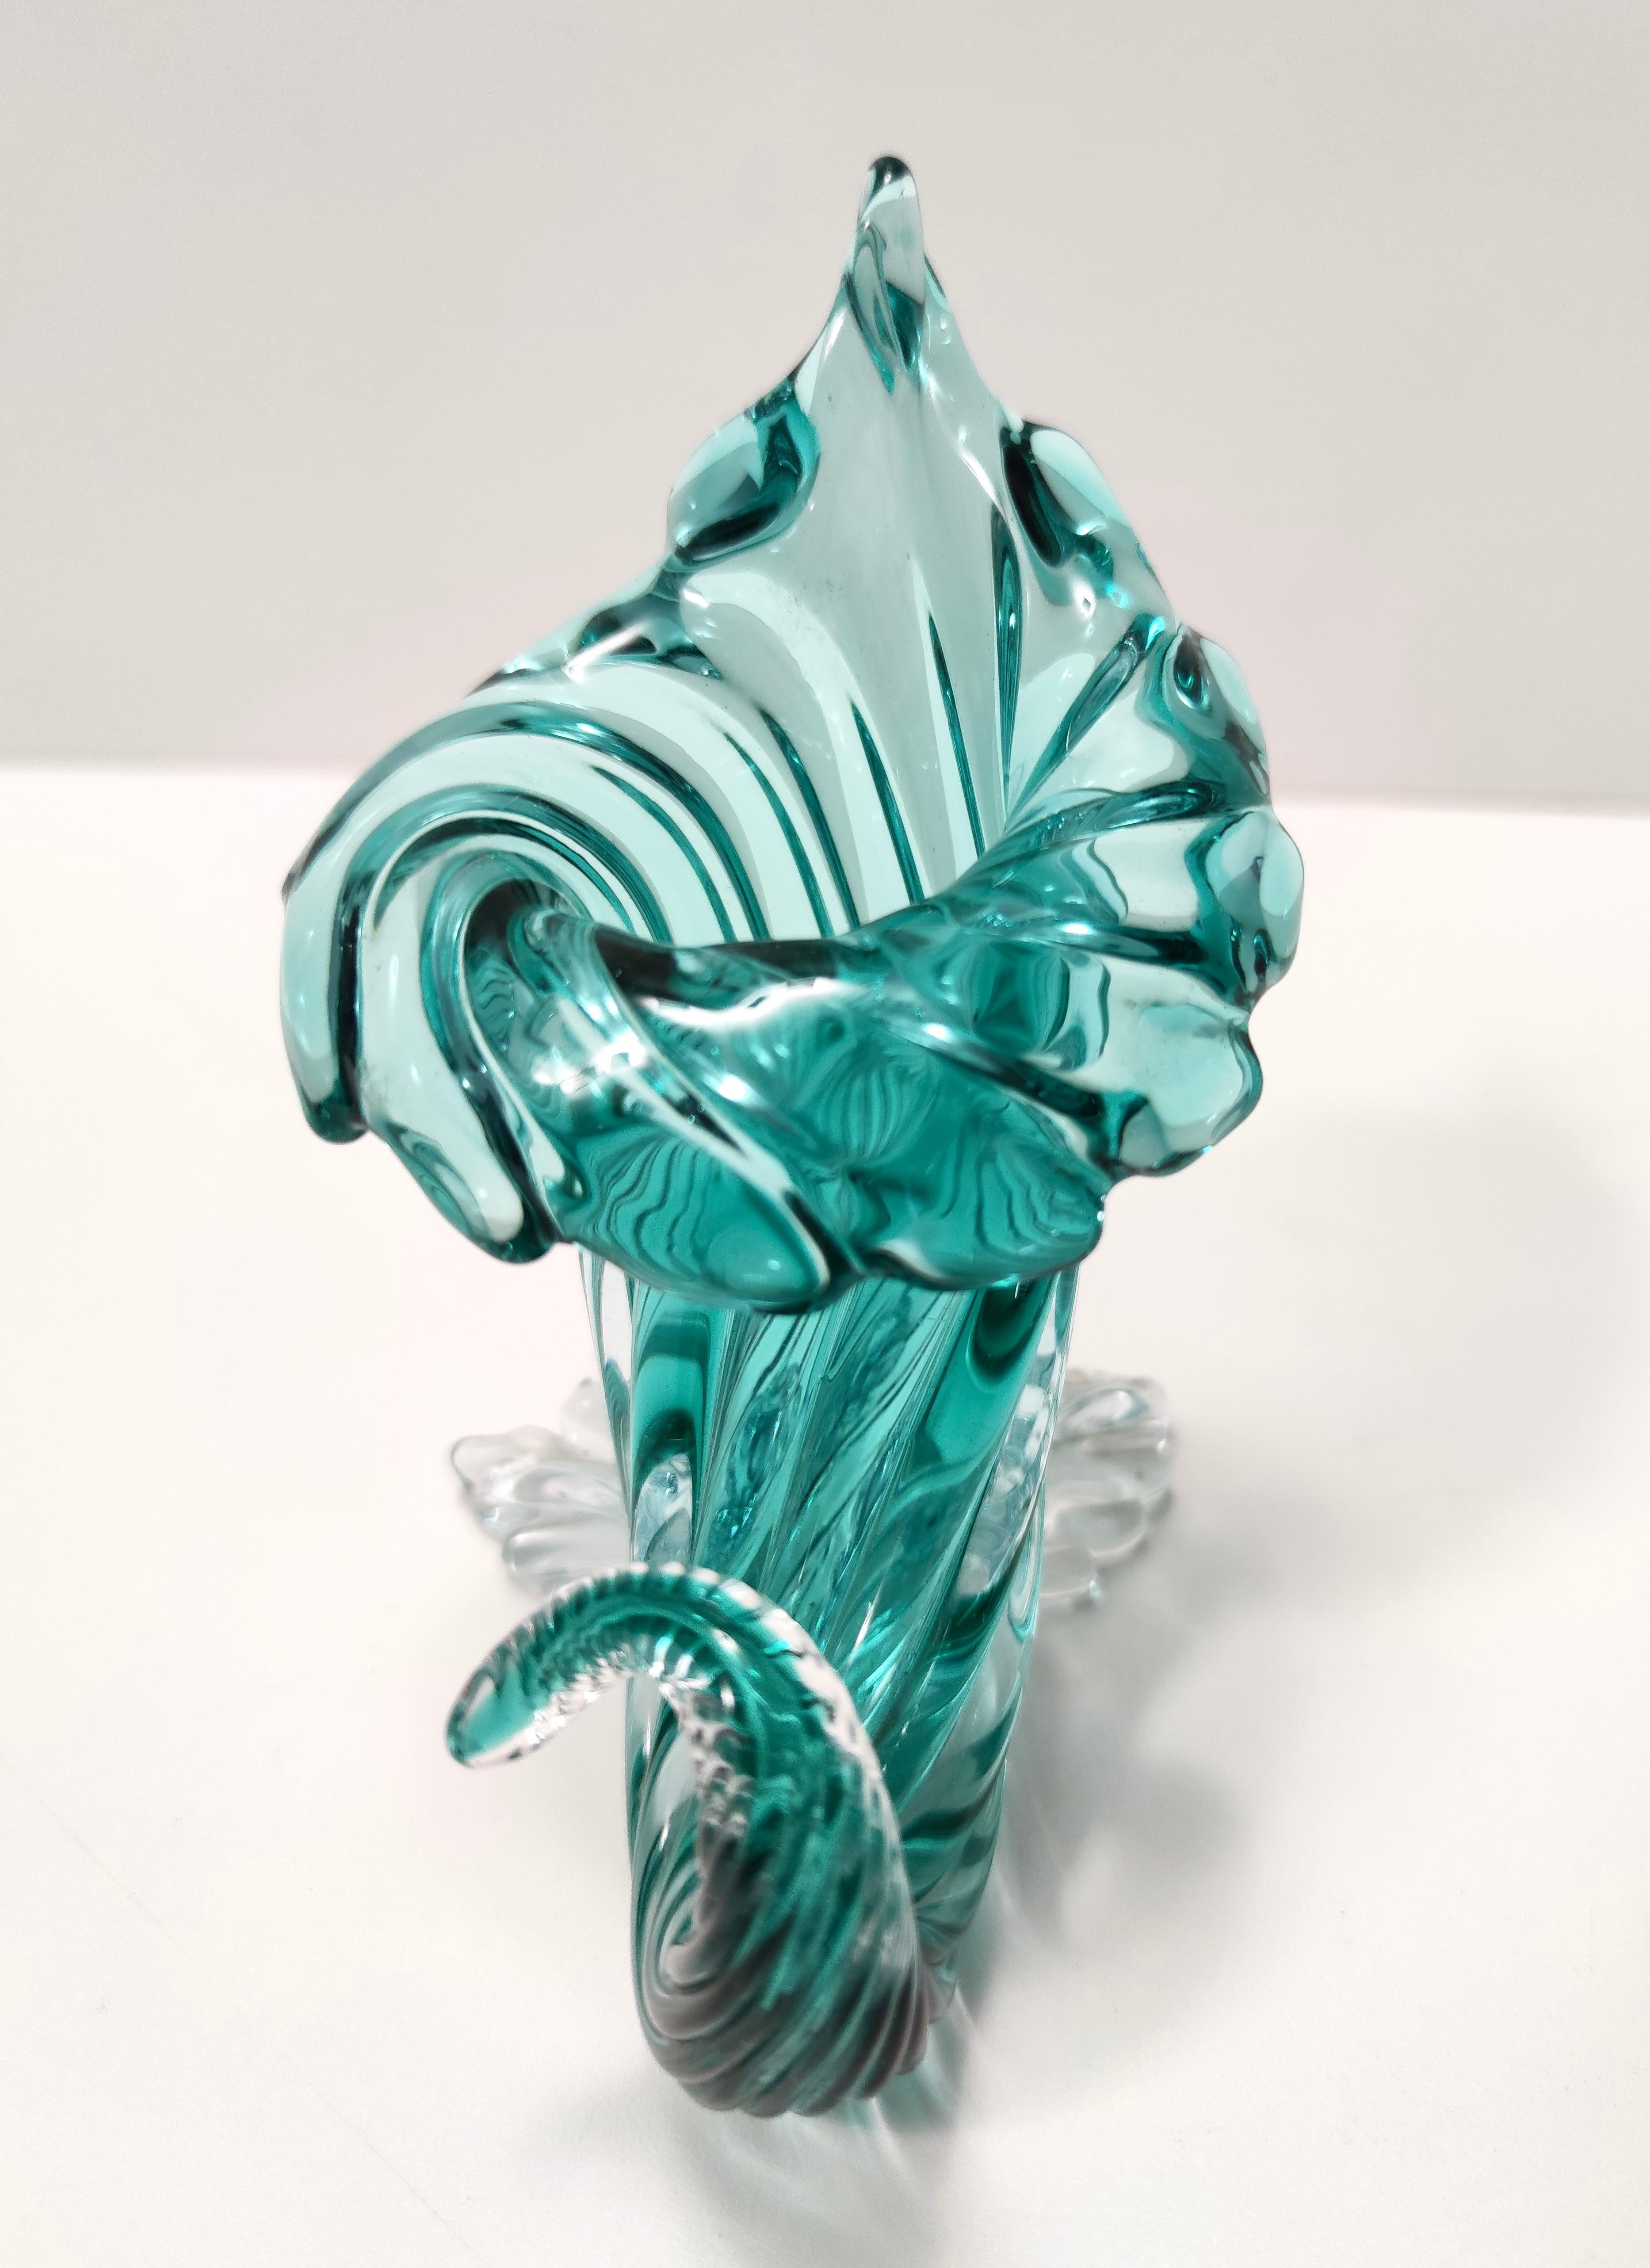 Vintage Teal Murano Glass Cornucopia Vase by Archimede Seguso, Italy For Sale 6